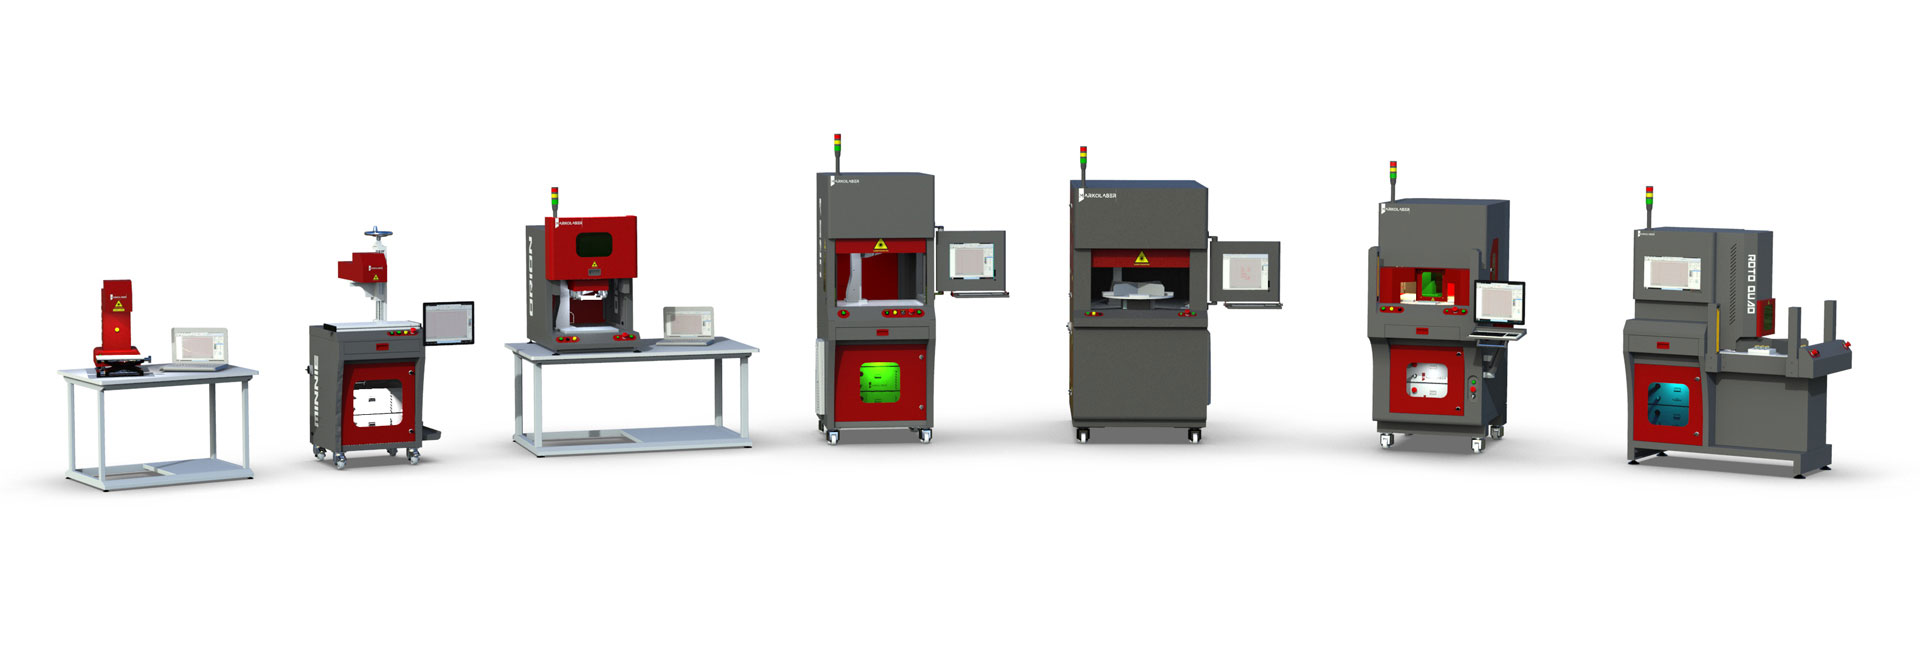 Laser Marking, Engraving, Welding, Microcutting and Drilling Machines Manufacturer & Distributor